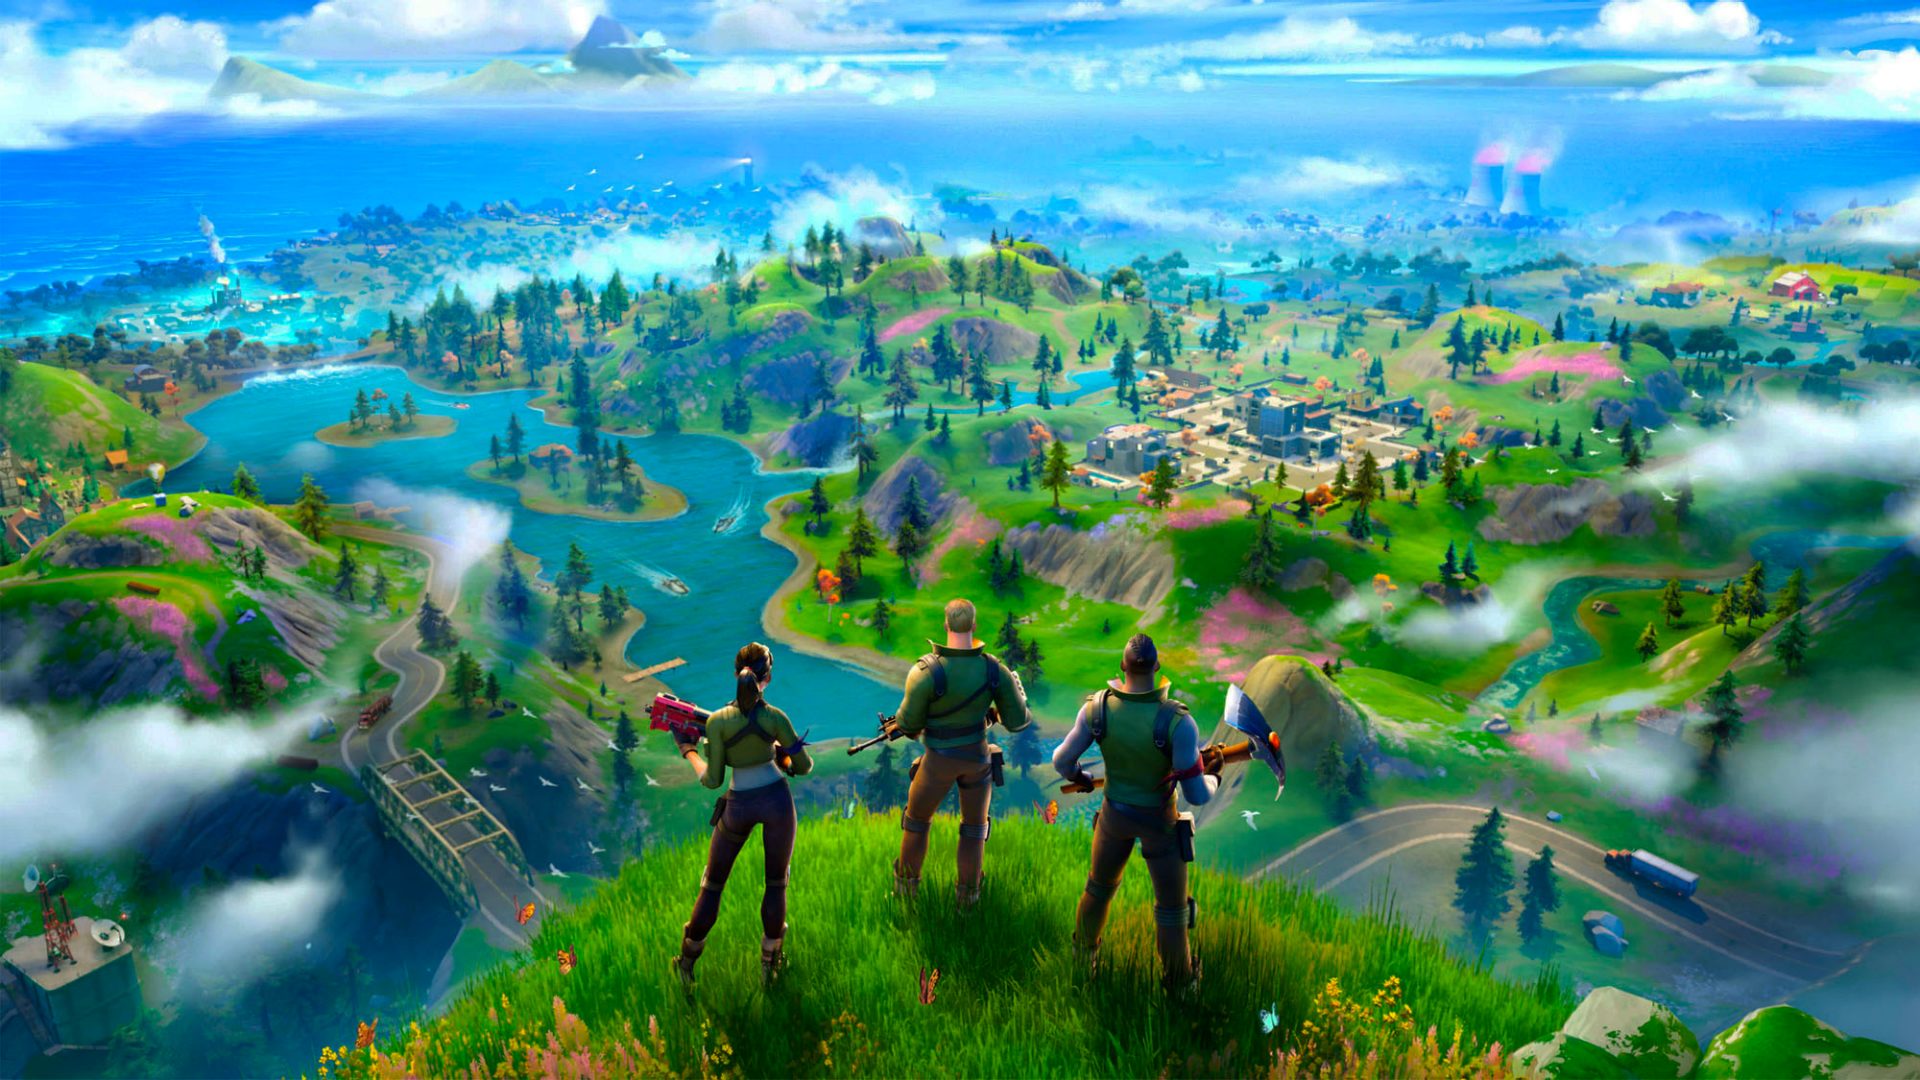 Fortnite creator Epic Games is working on multiple live events